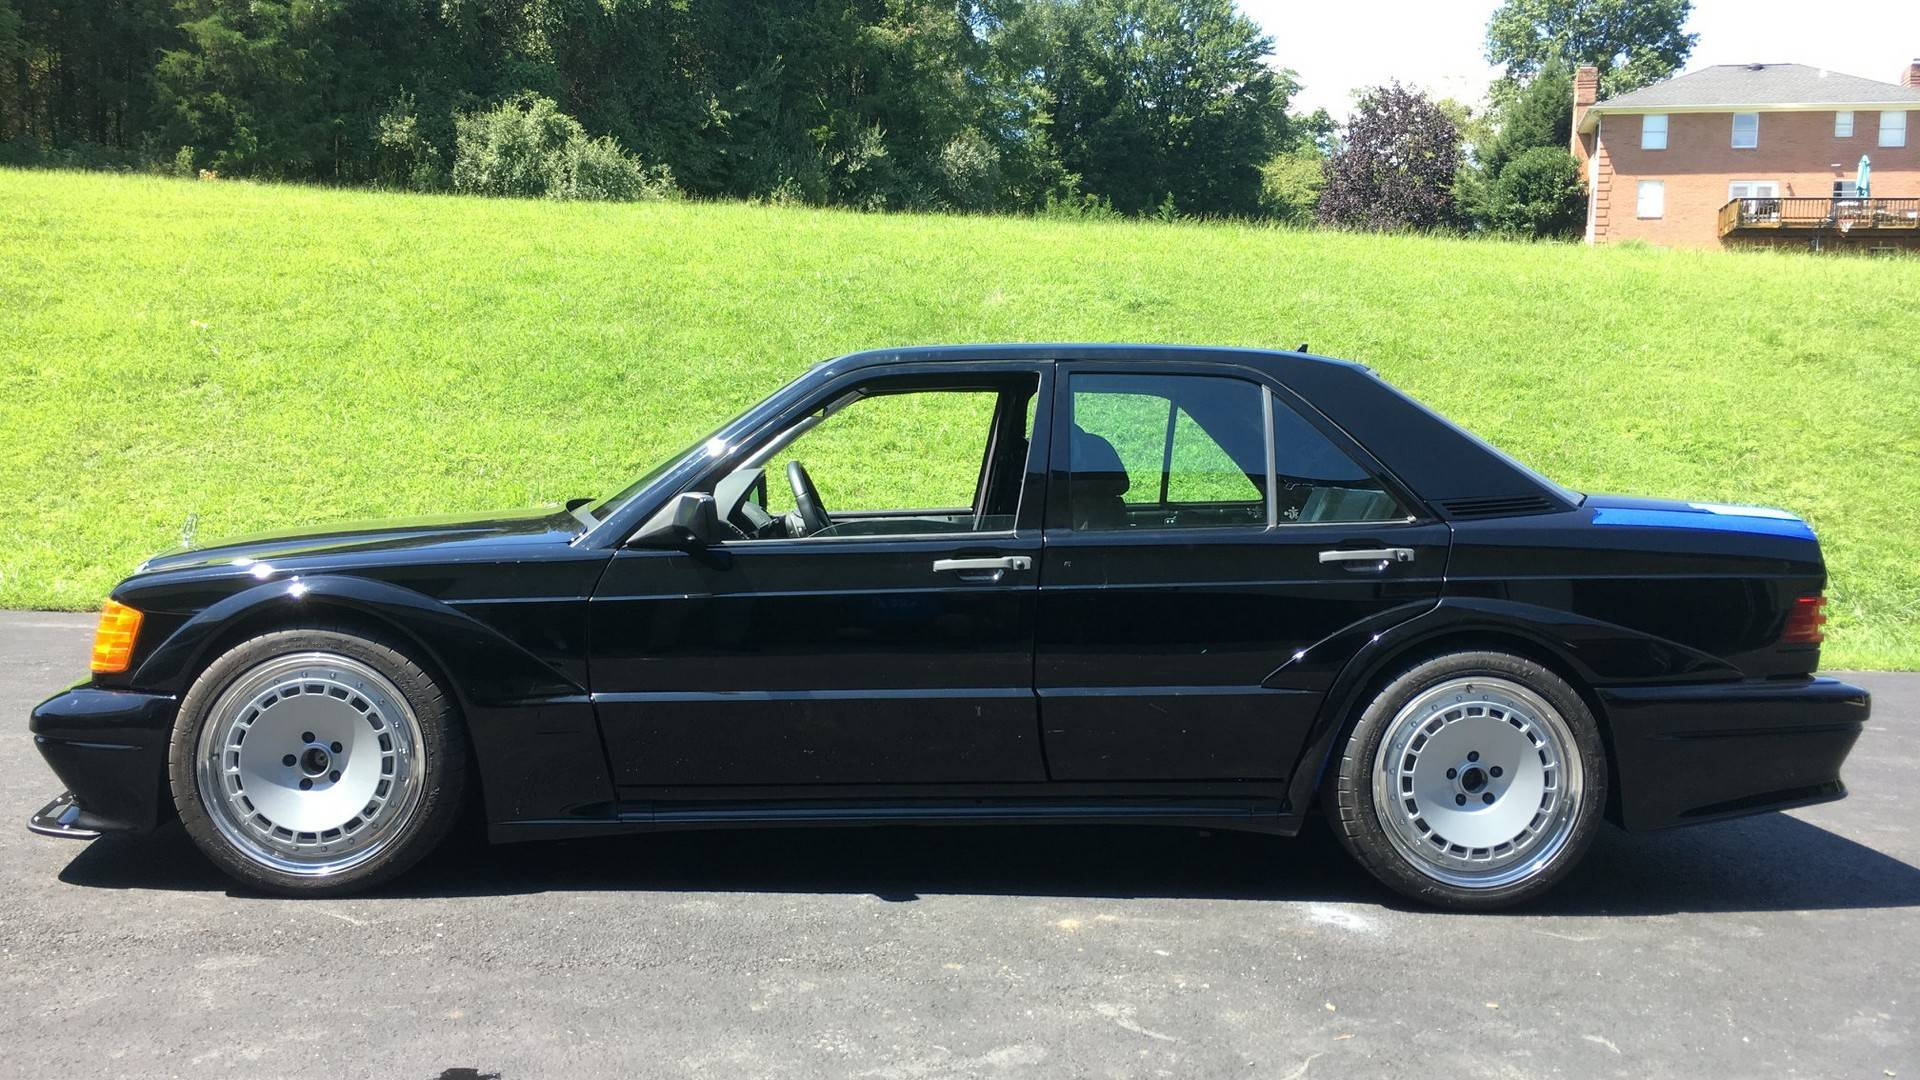 Mercedes-Benz 190E merged with C63 AMG